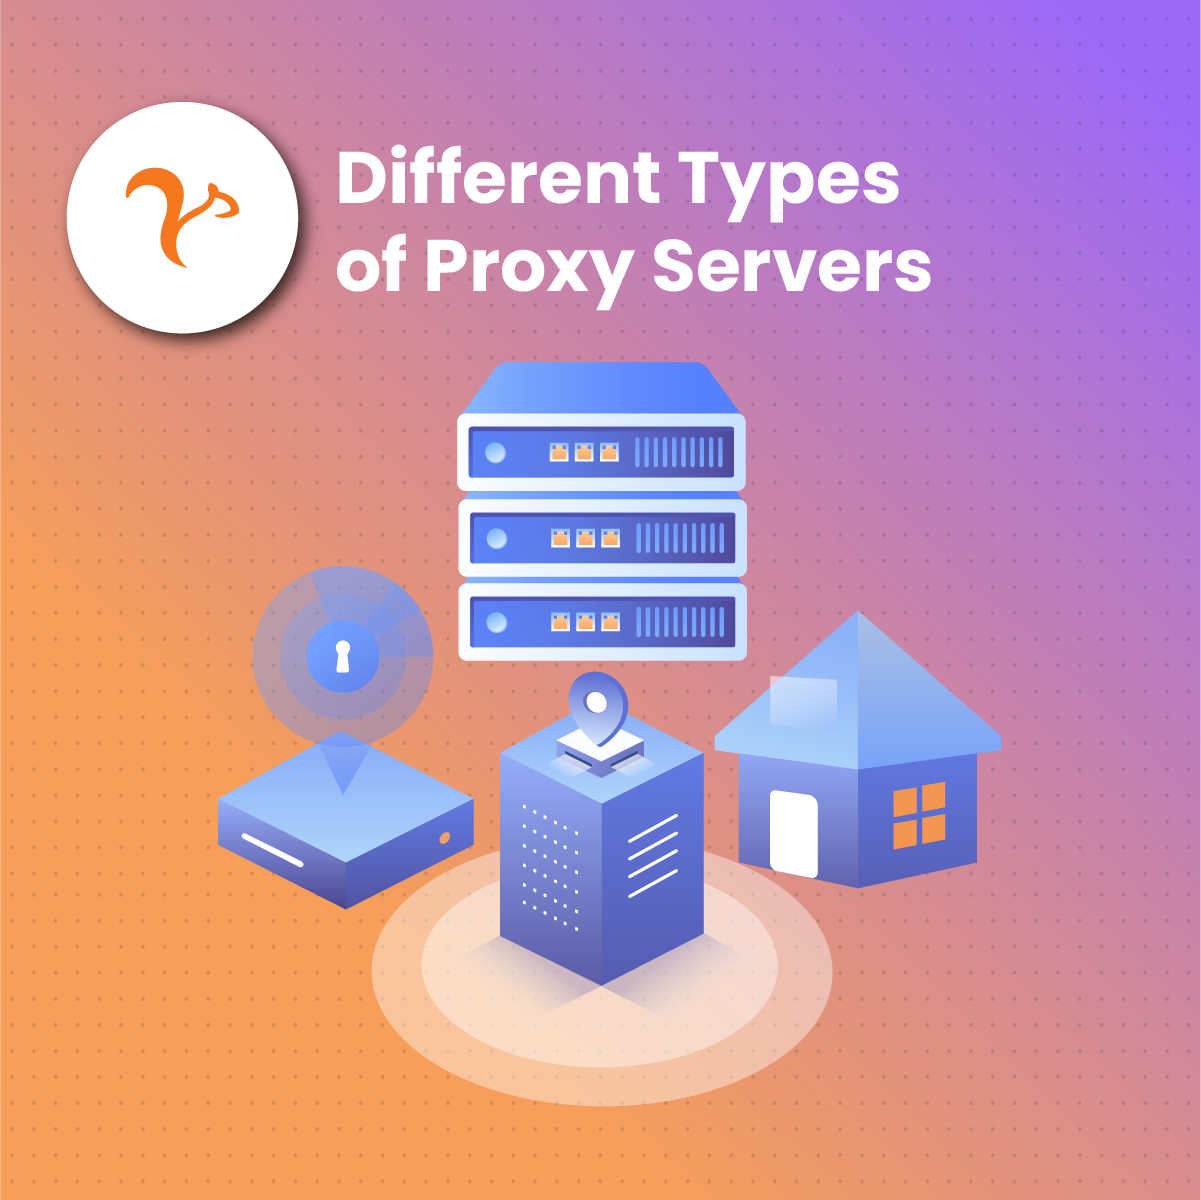 Different Types of Proxy Servers